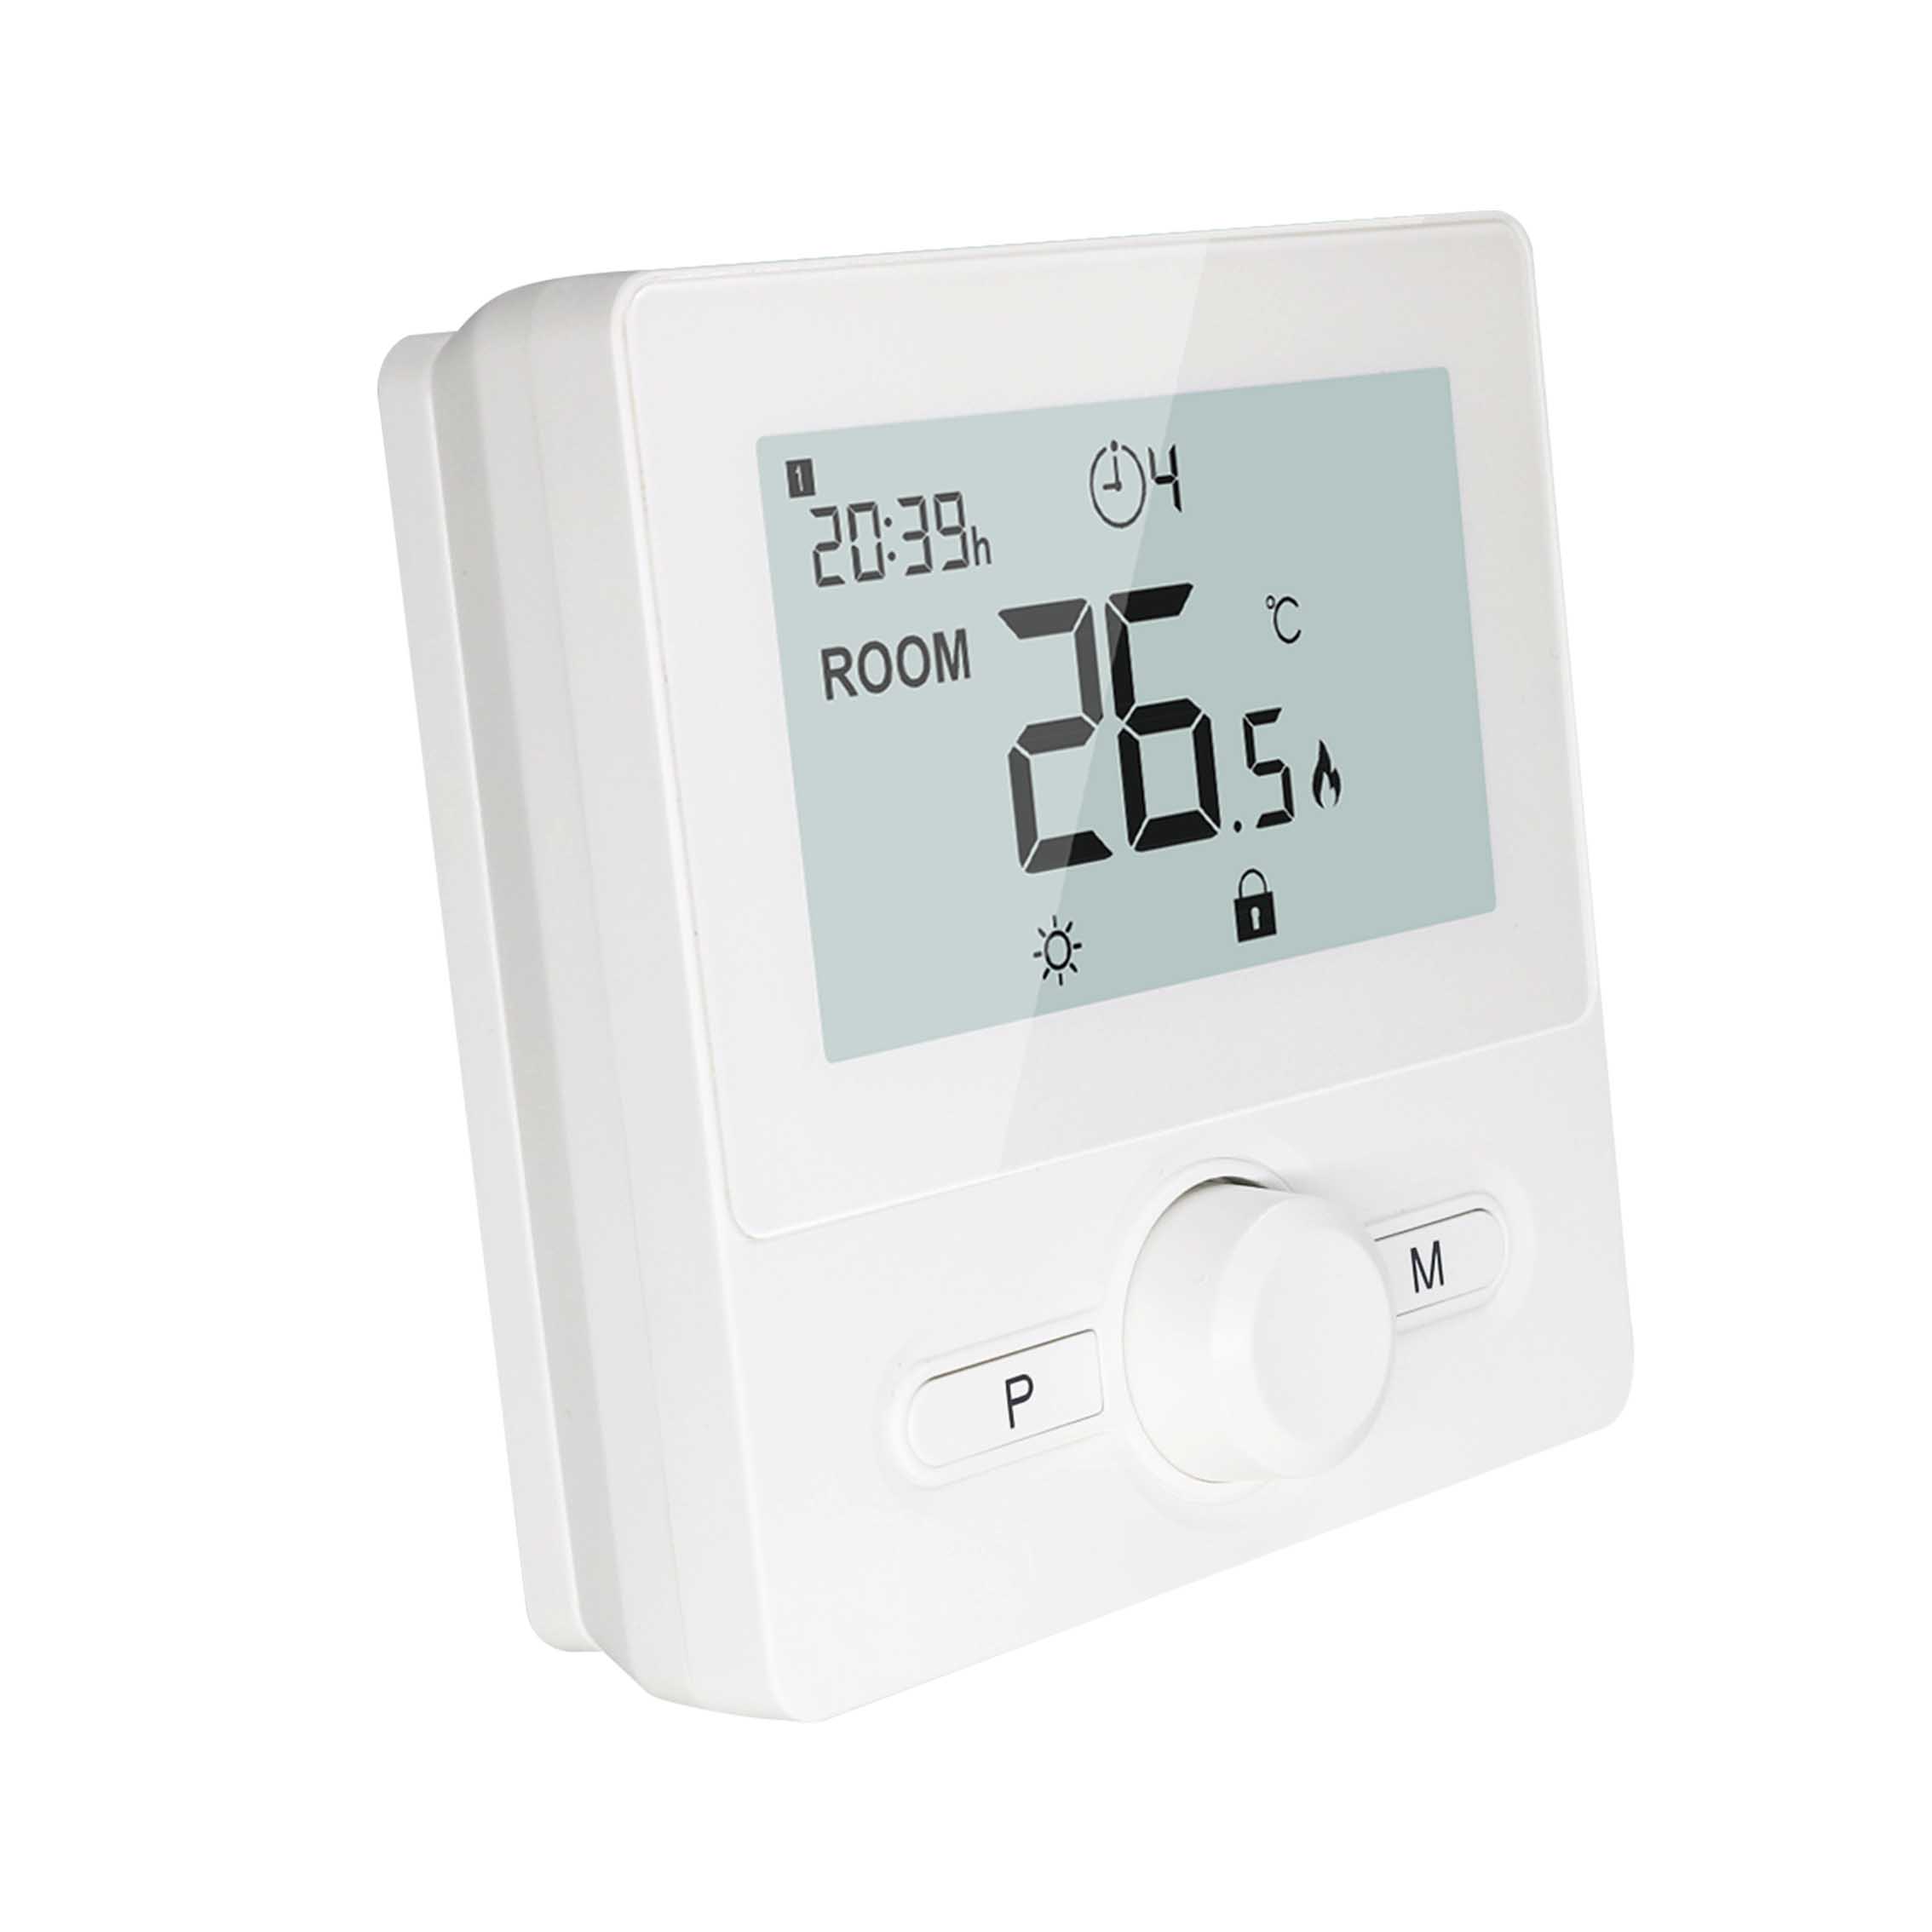 Smart Opentherm Wifi Thermostat for Boiler Heating